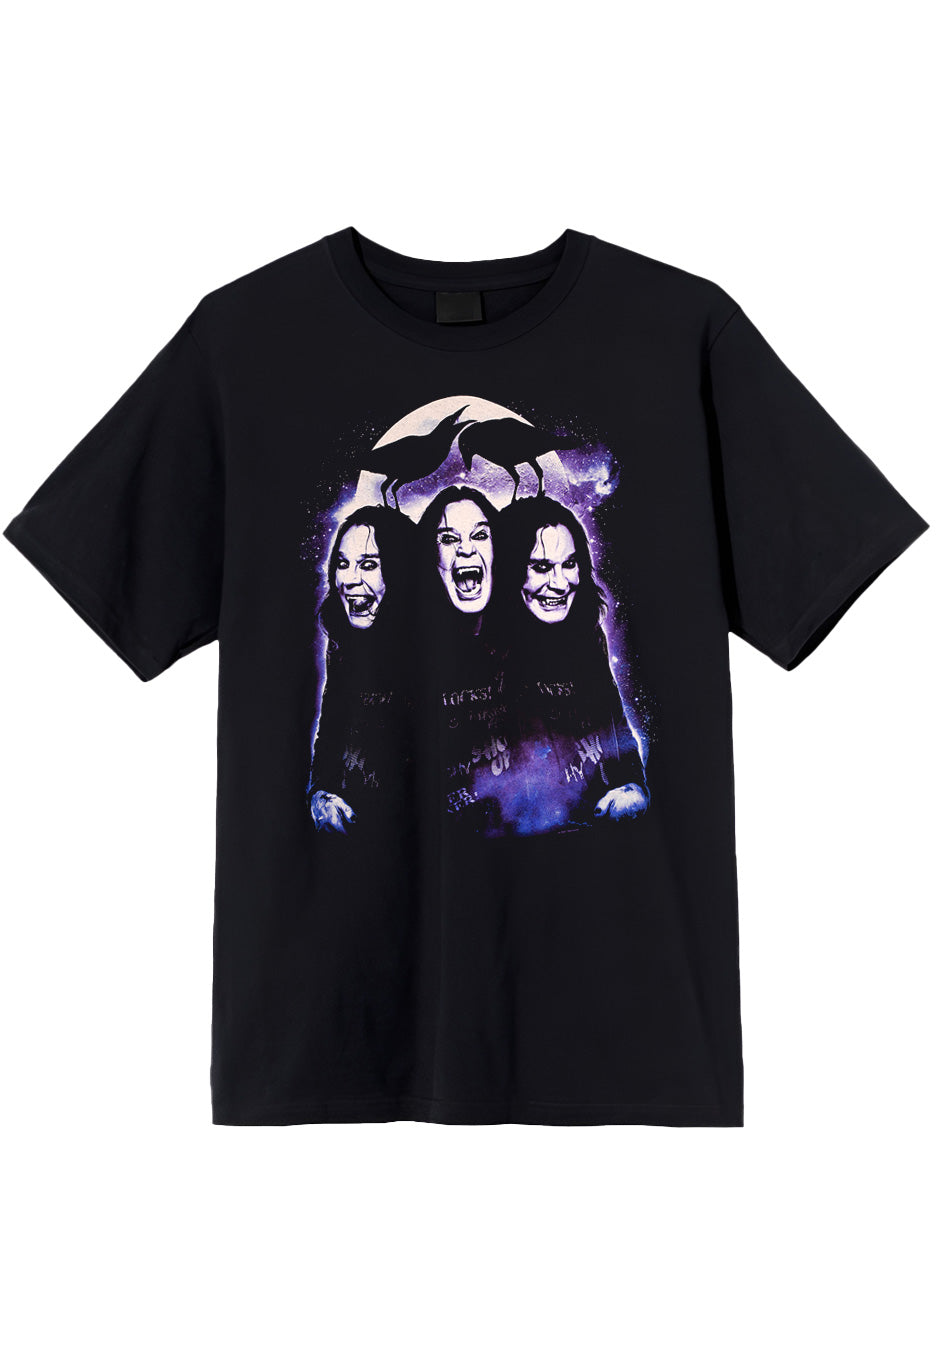 Ozzy Osbourne - Crows And Bats - T-Shirt